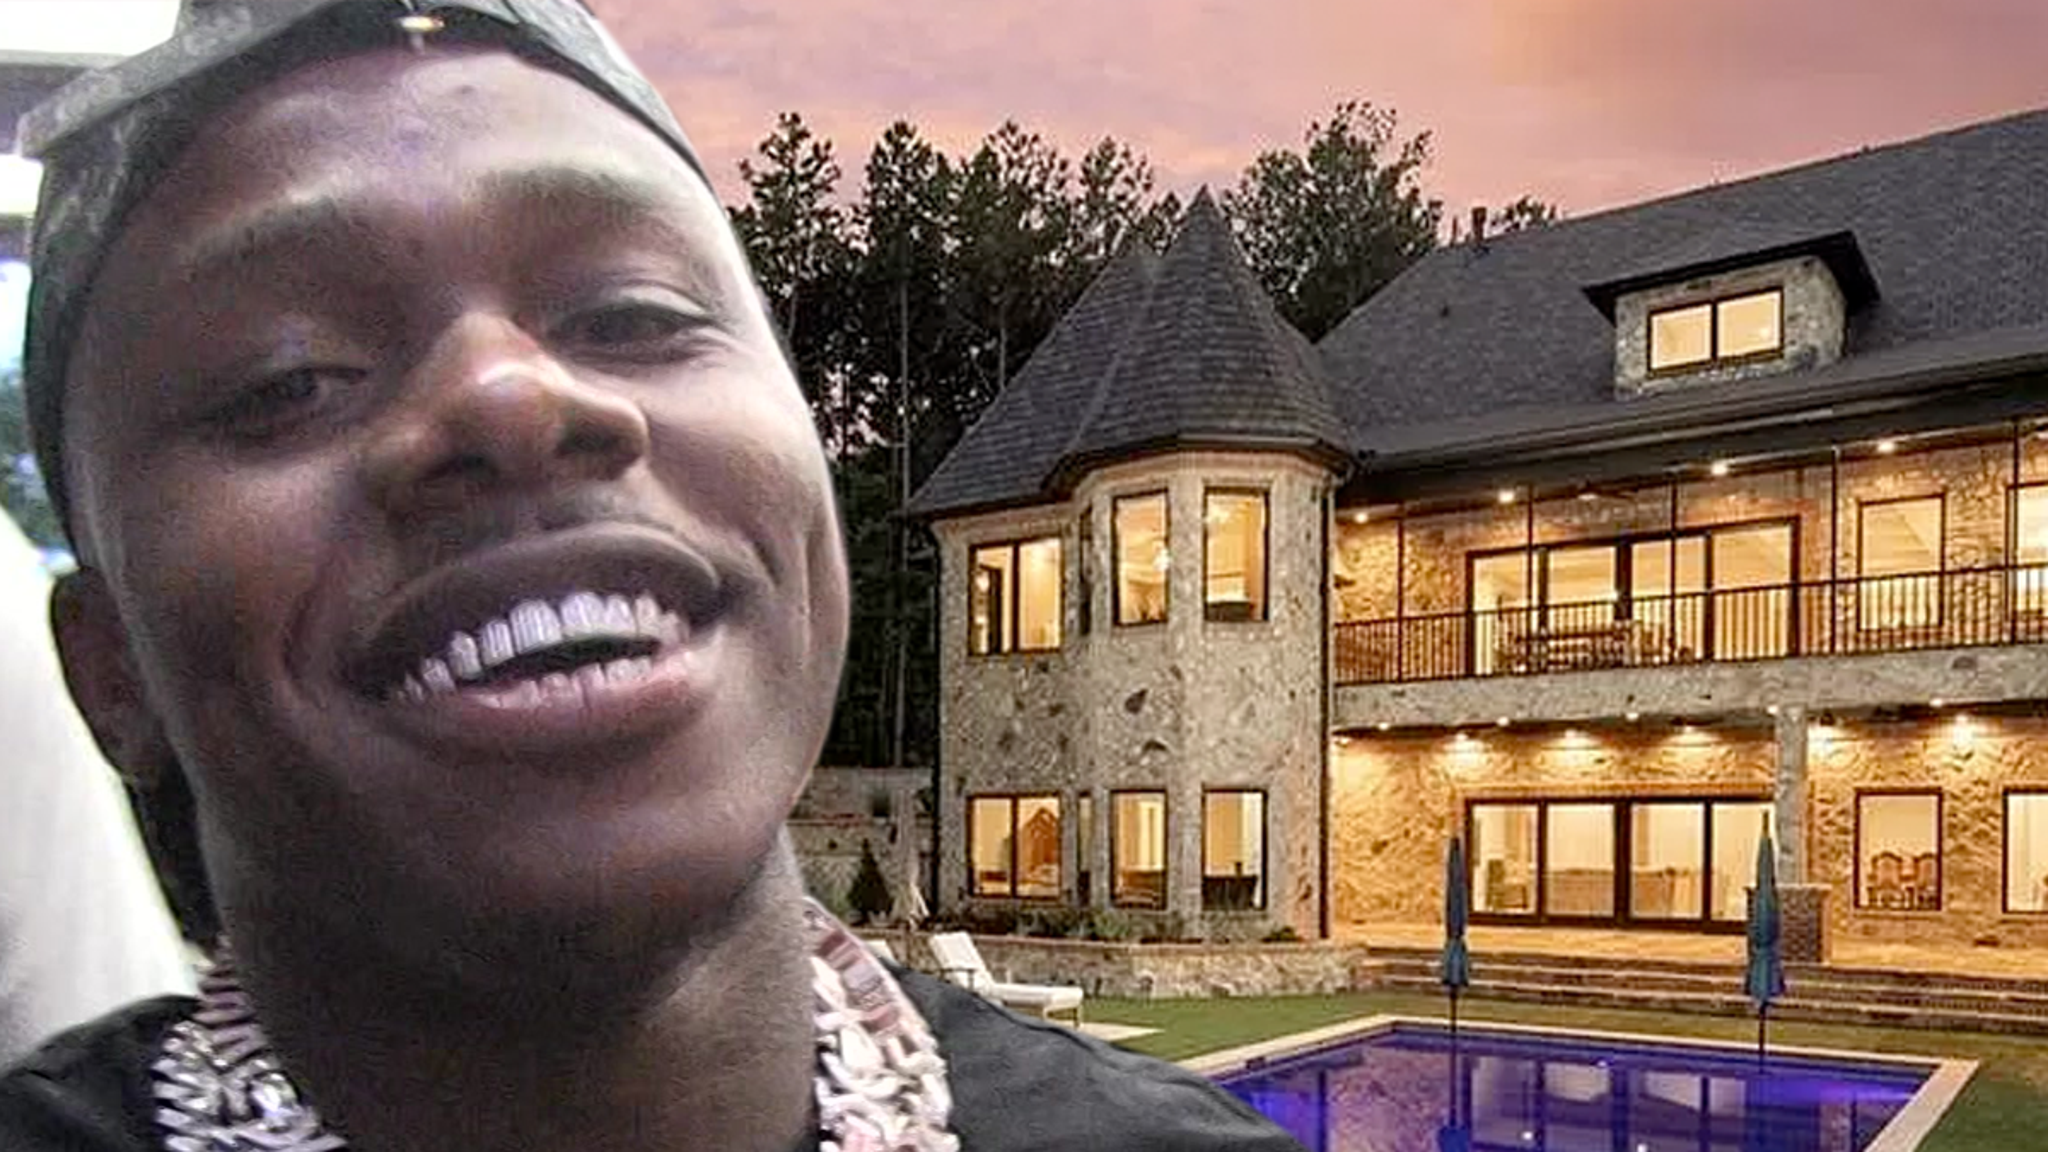 DaBaby Sends Well-Wishes to Trespasser He Shot thumbnail